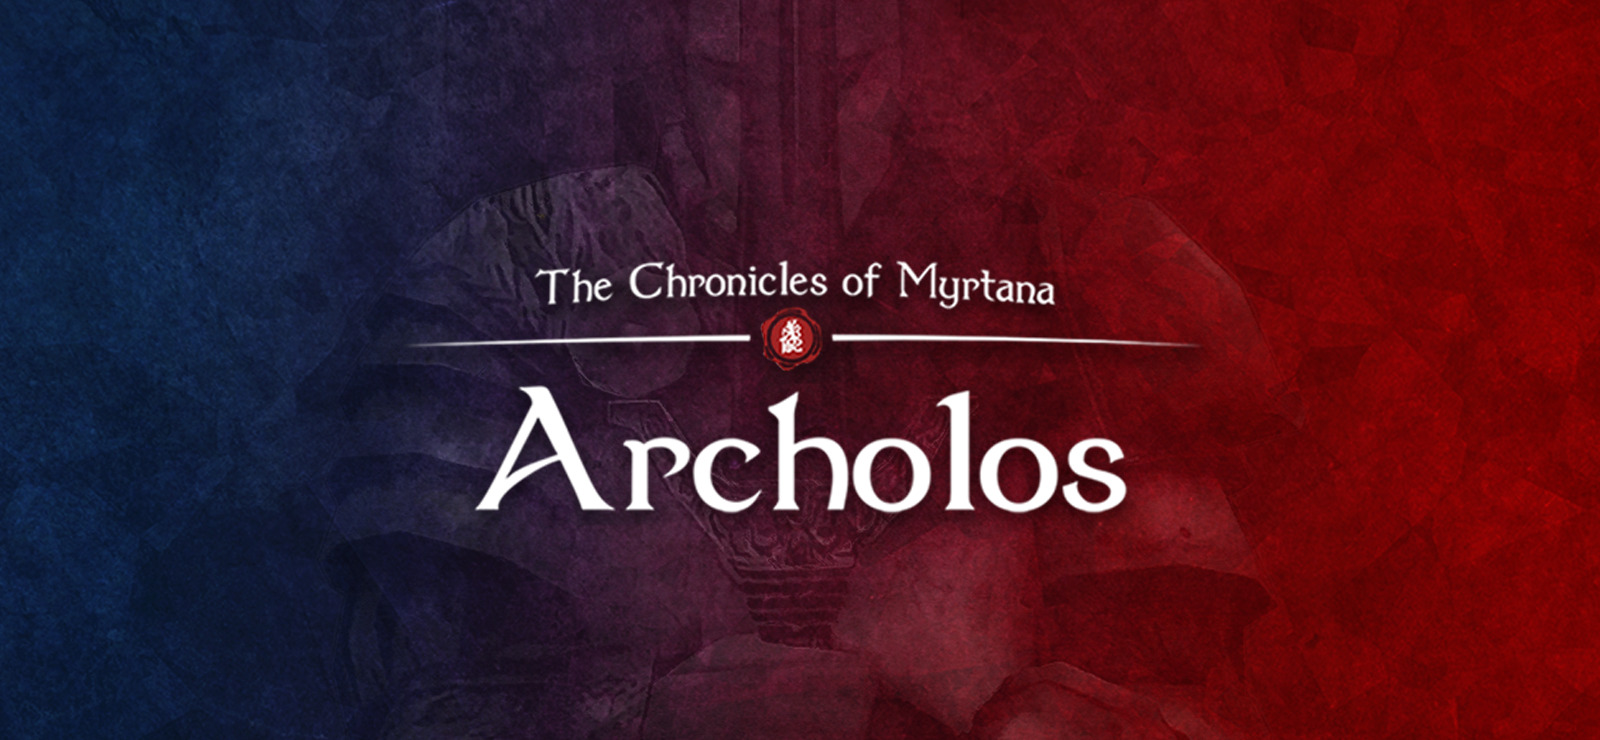 Download The Chronicles Of Myrtana Archolos v1.2.3